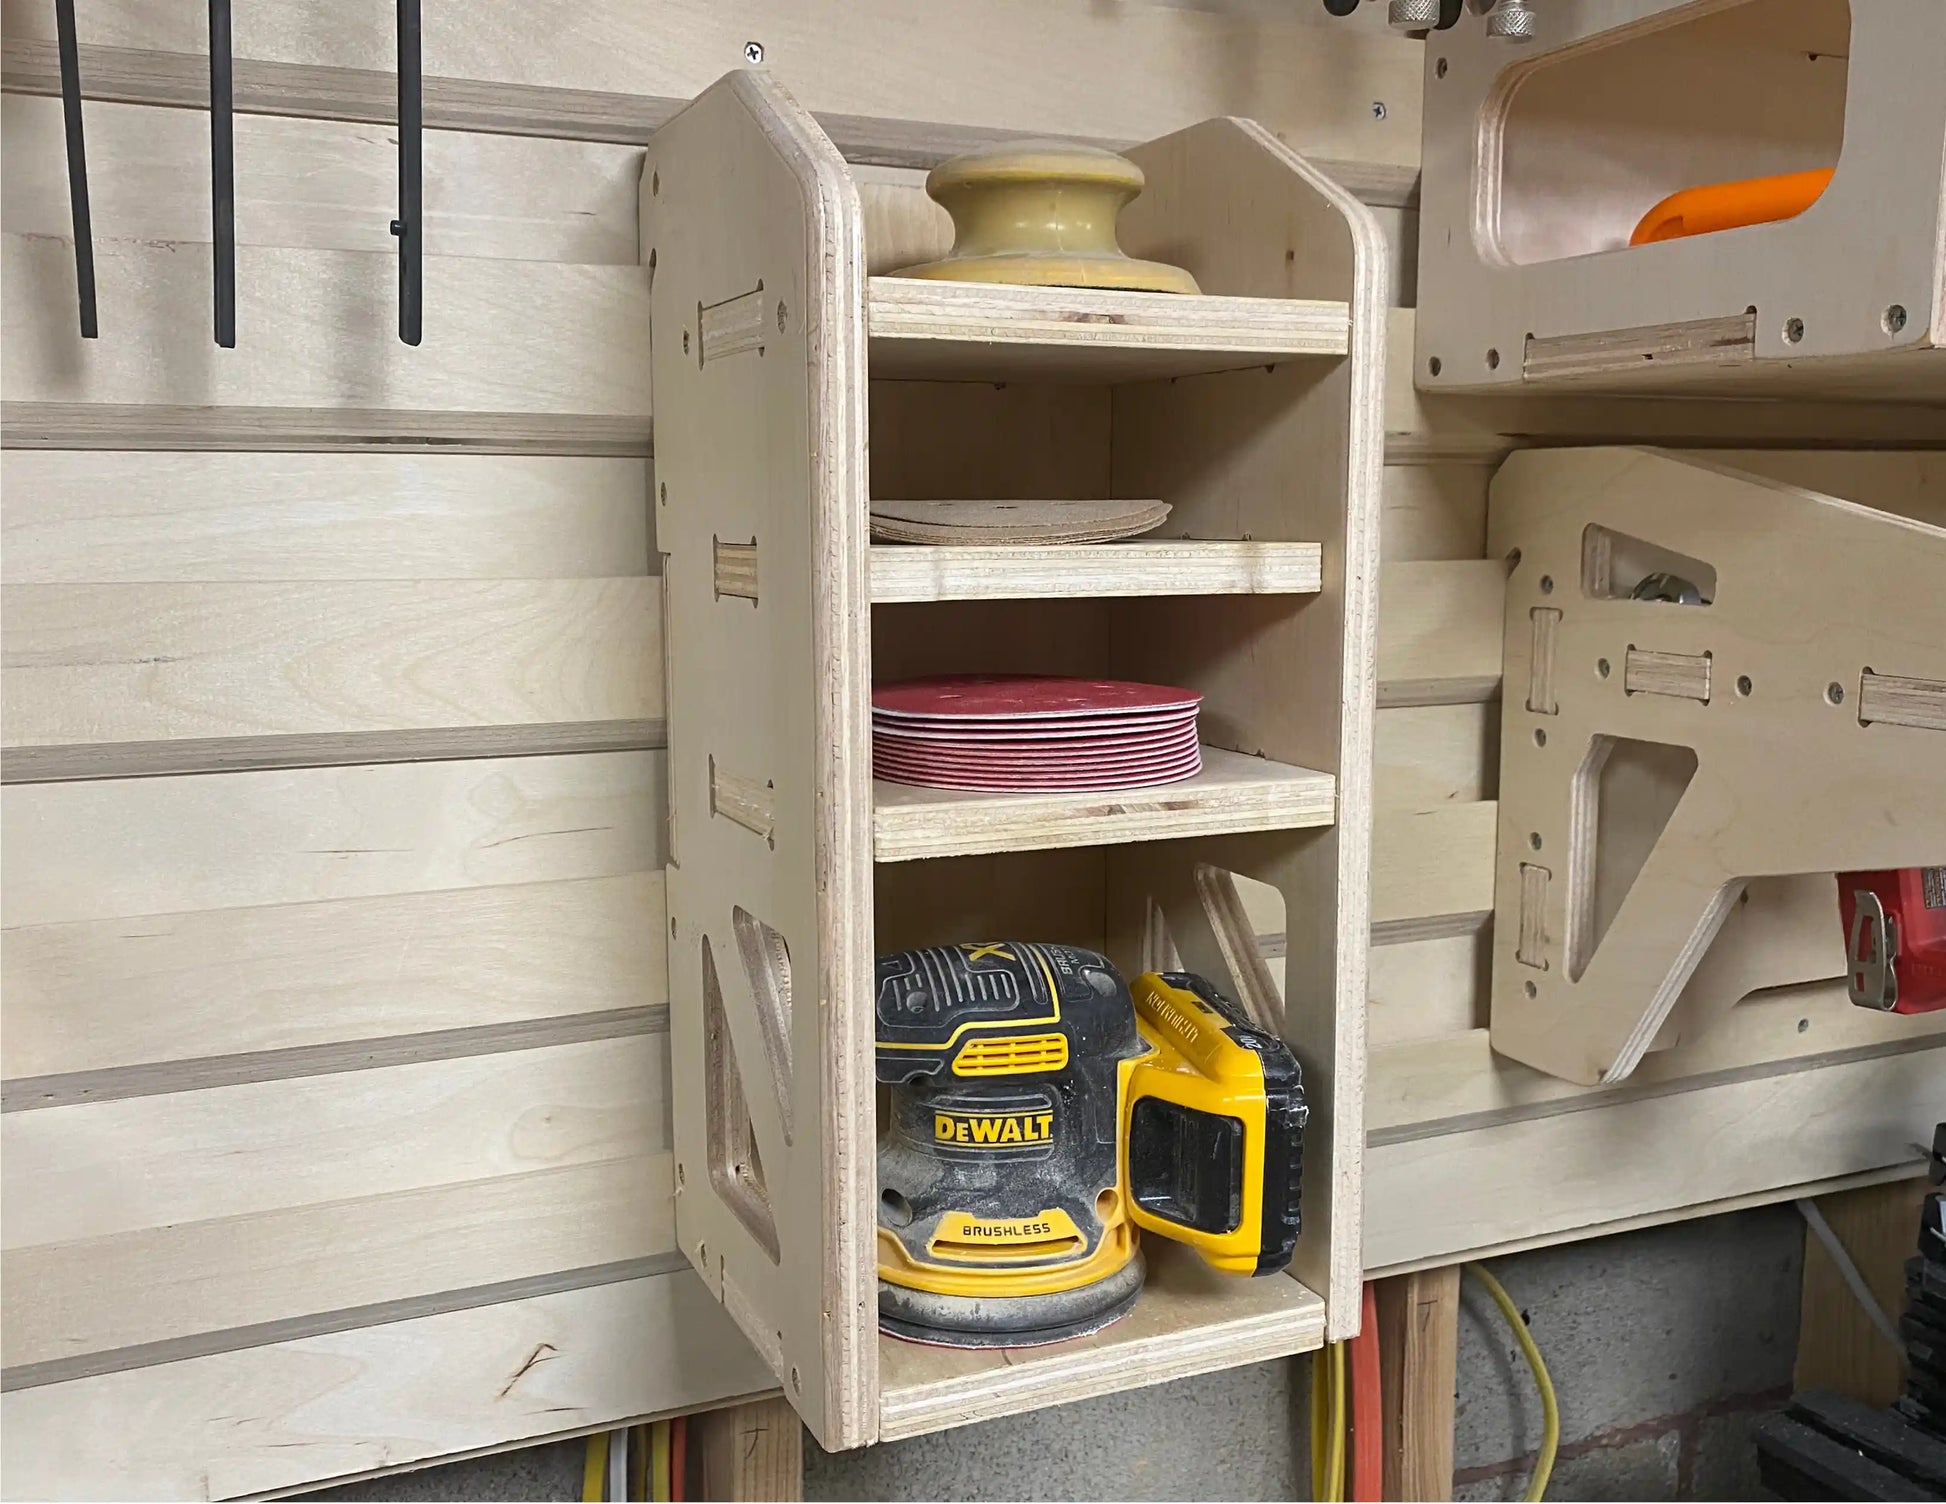 Small sandpaper storage cabinet for storing sandpaper disks and orbital sanders on a french cleat storage wall using a cnc router machine